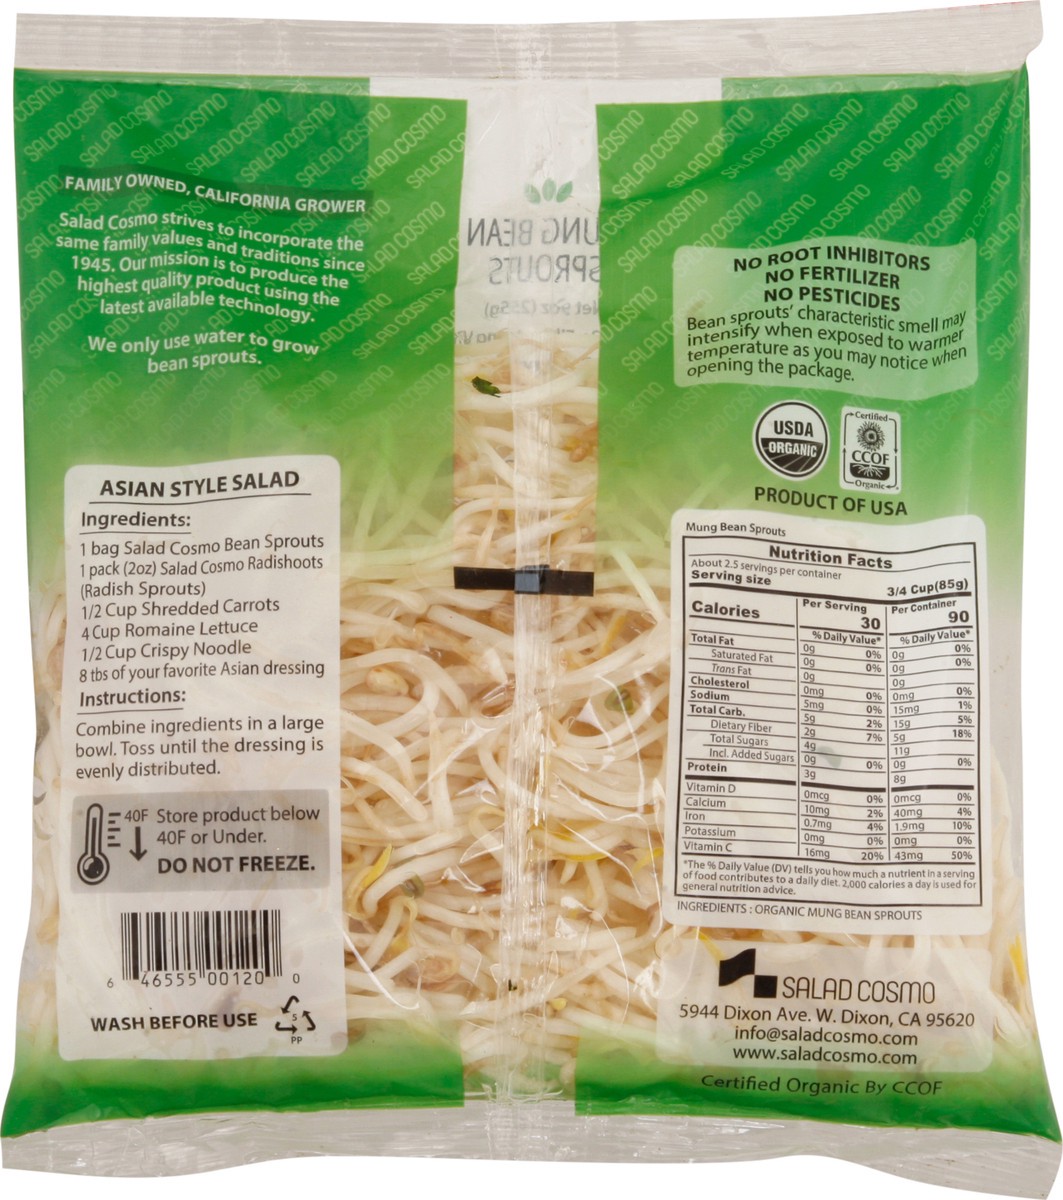 slide 11 of 14, Salad Cosmo Organic Mung Bean Sprouts 9 oz, 9 oz